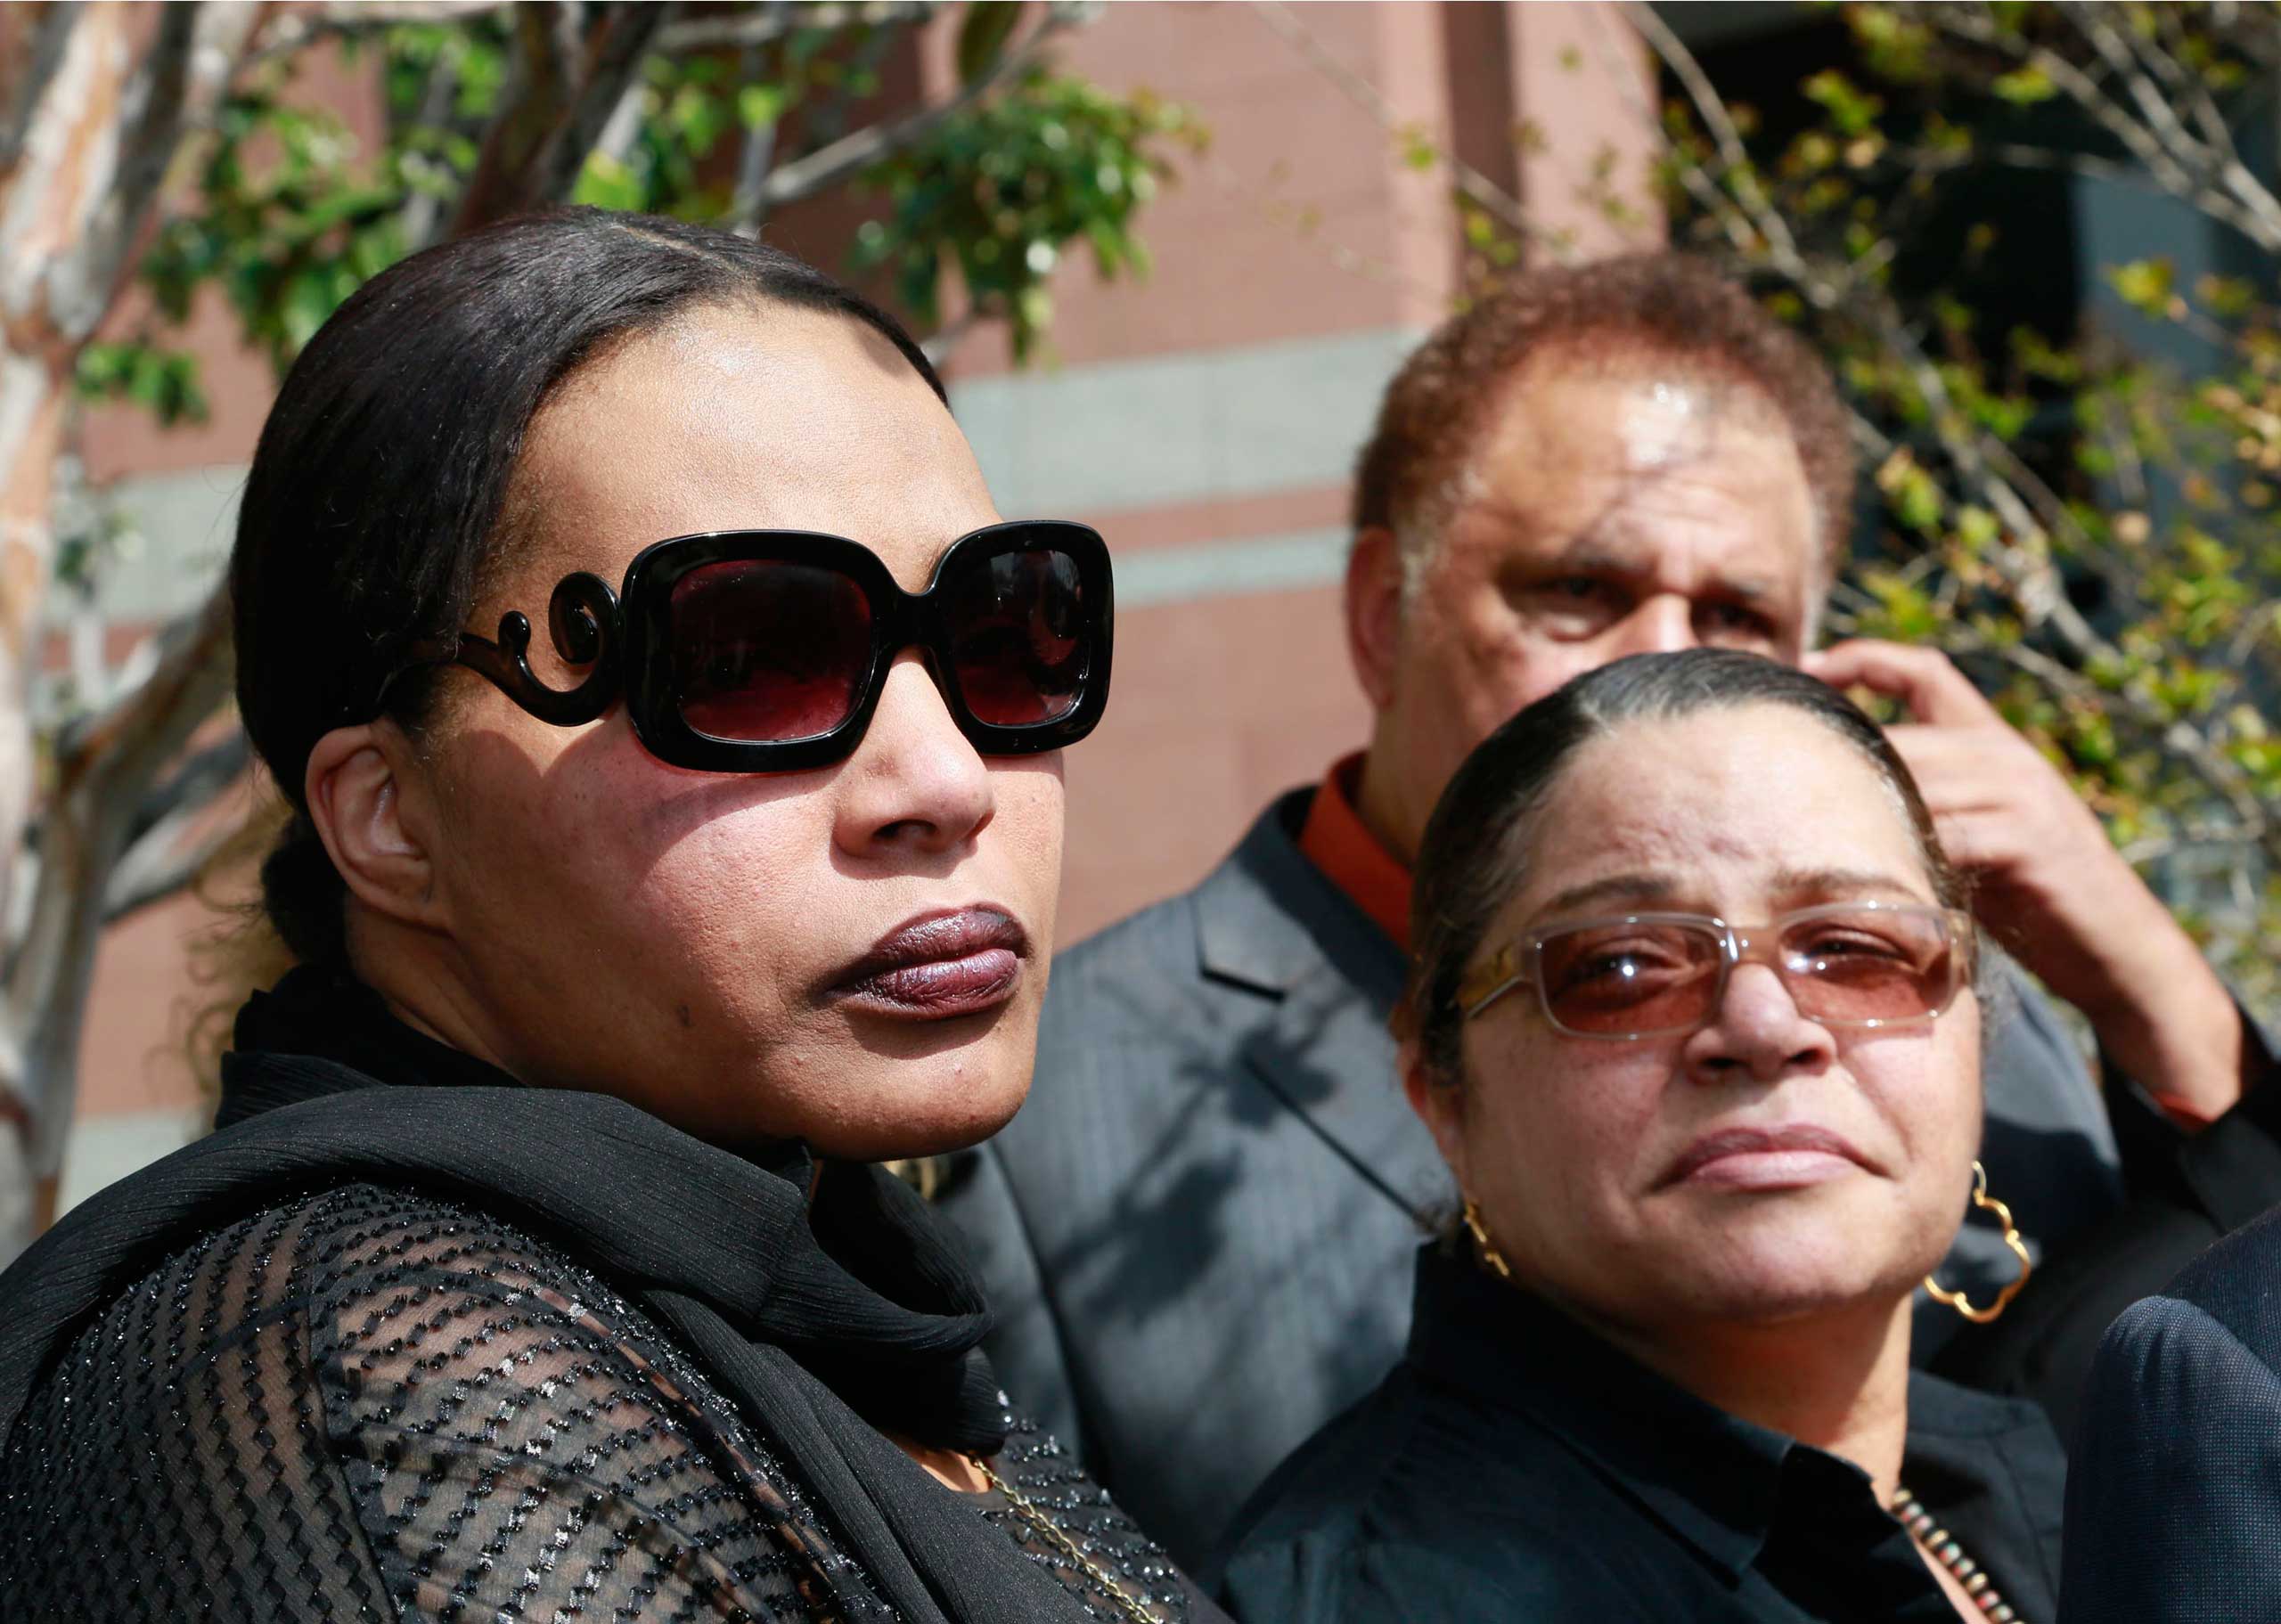 Marvin Gaye's daughter, Nona Gaye, left, and his ex-wife, Jan Gaye, take questions from the media outside Los Angeles U.S. District Court, after a jury awarded the singer's children nearly $7.4 million after determining singers Robin Thicke and Pharrell Williams copied their father's music to create "Blurred Lines," March 10, 2015. (Nick Ut—AP)